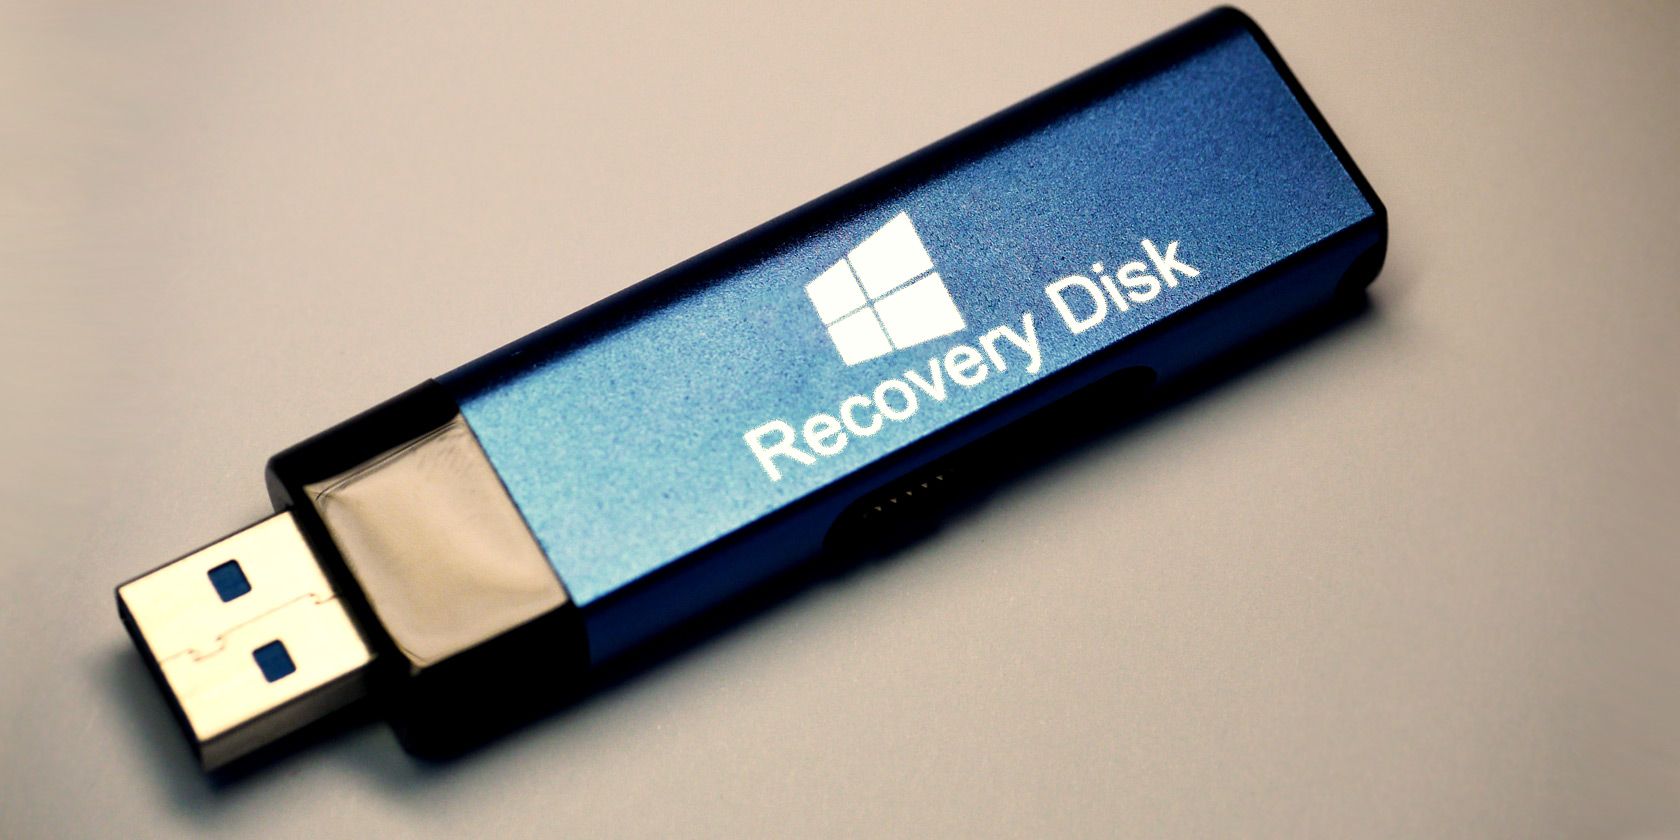 How a Windows 8 Recovery Disk